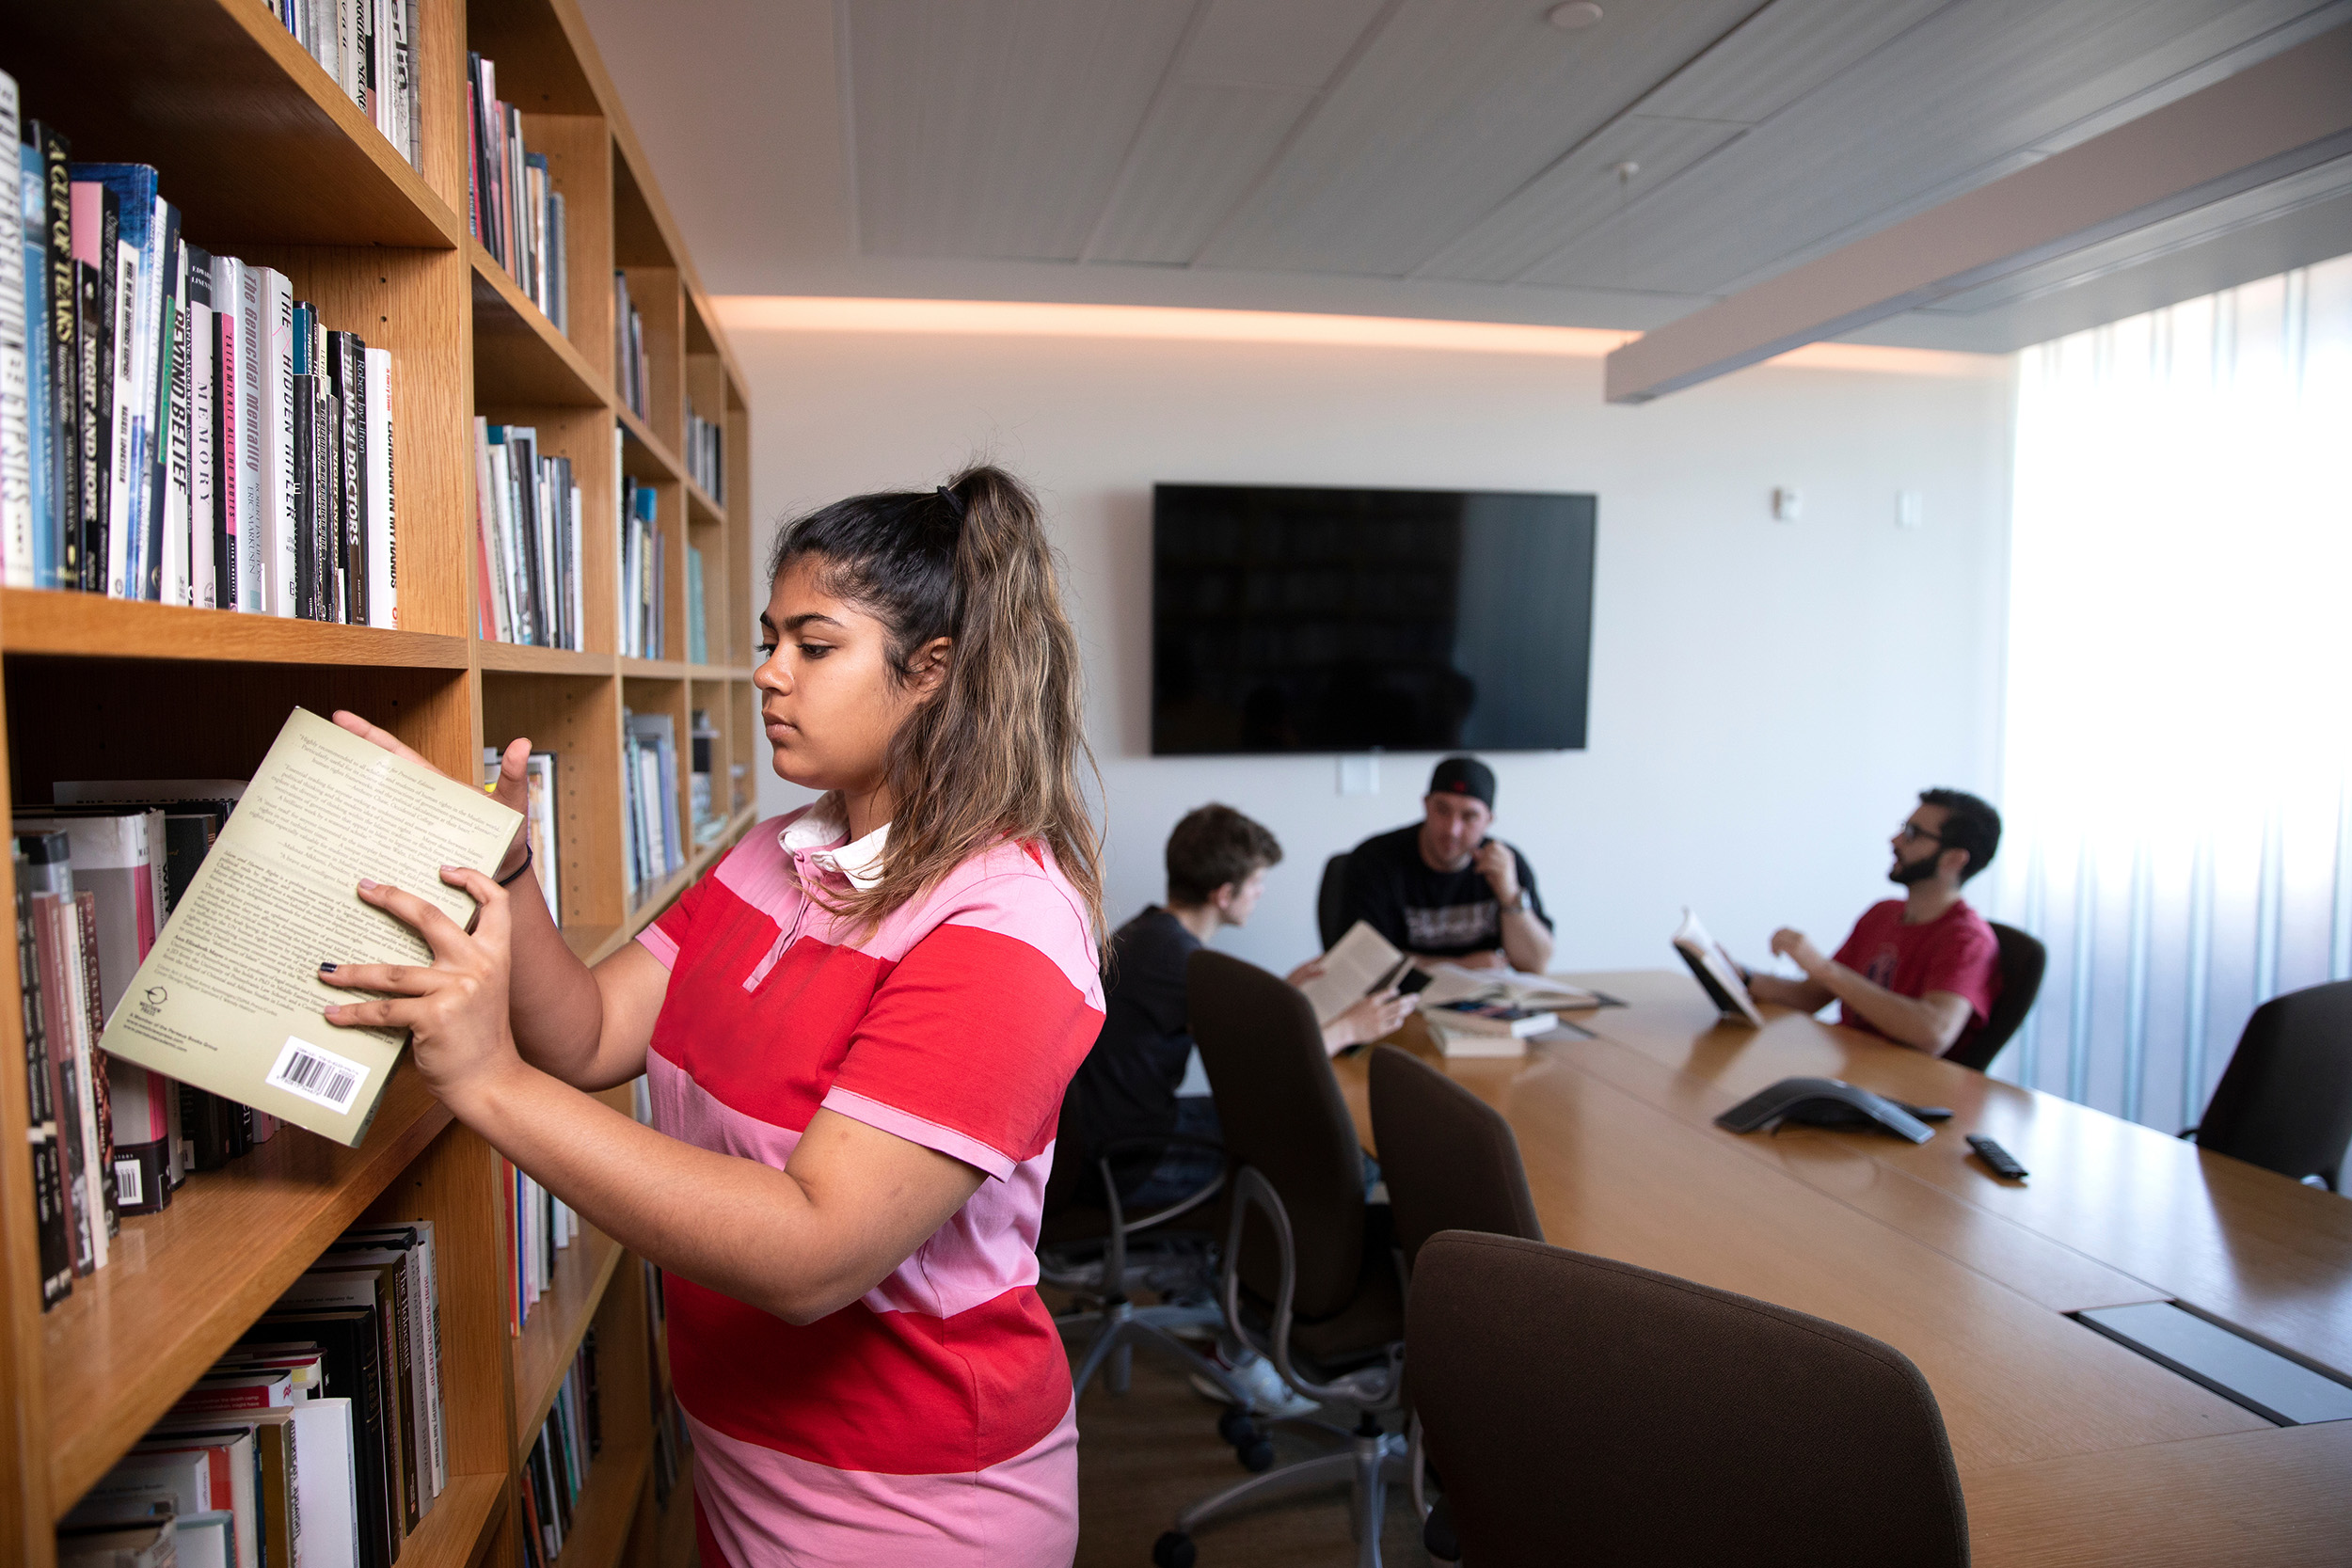 Students pursue research in the Center’s John K. and Lyn Roth library.